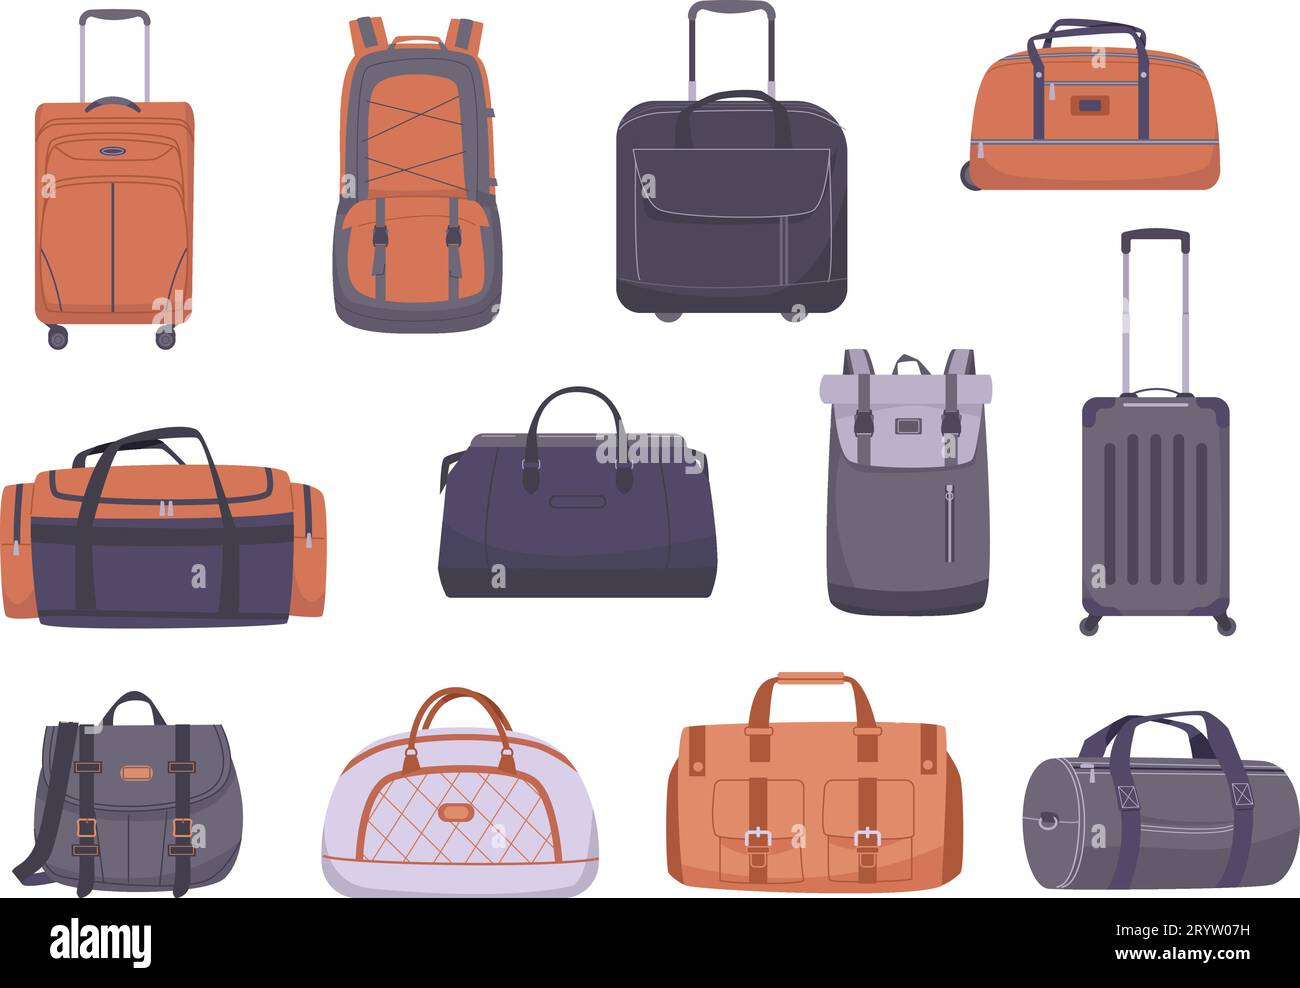 Travel luggage, bags and suitcases. Fabric backpack and plastic suitcase, touristic handbag. Isolated flat tourism baggage, kicky vector clipart Stock Vector